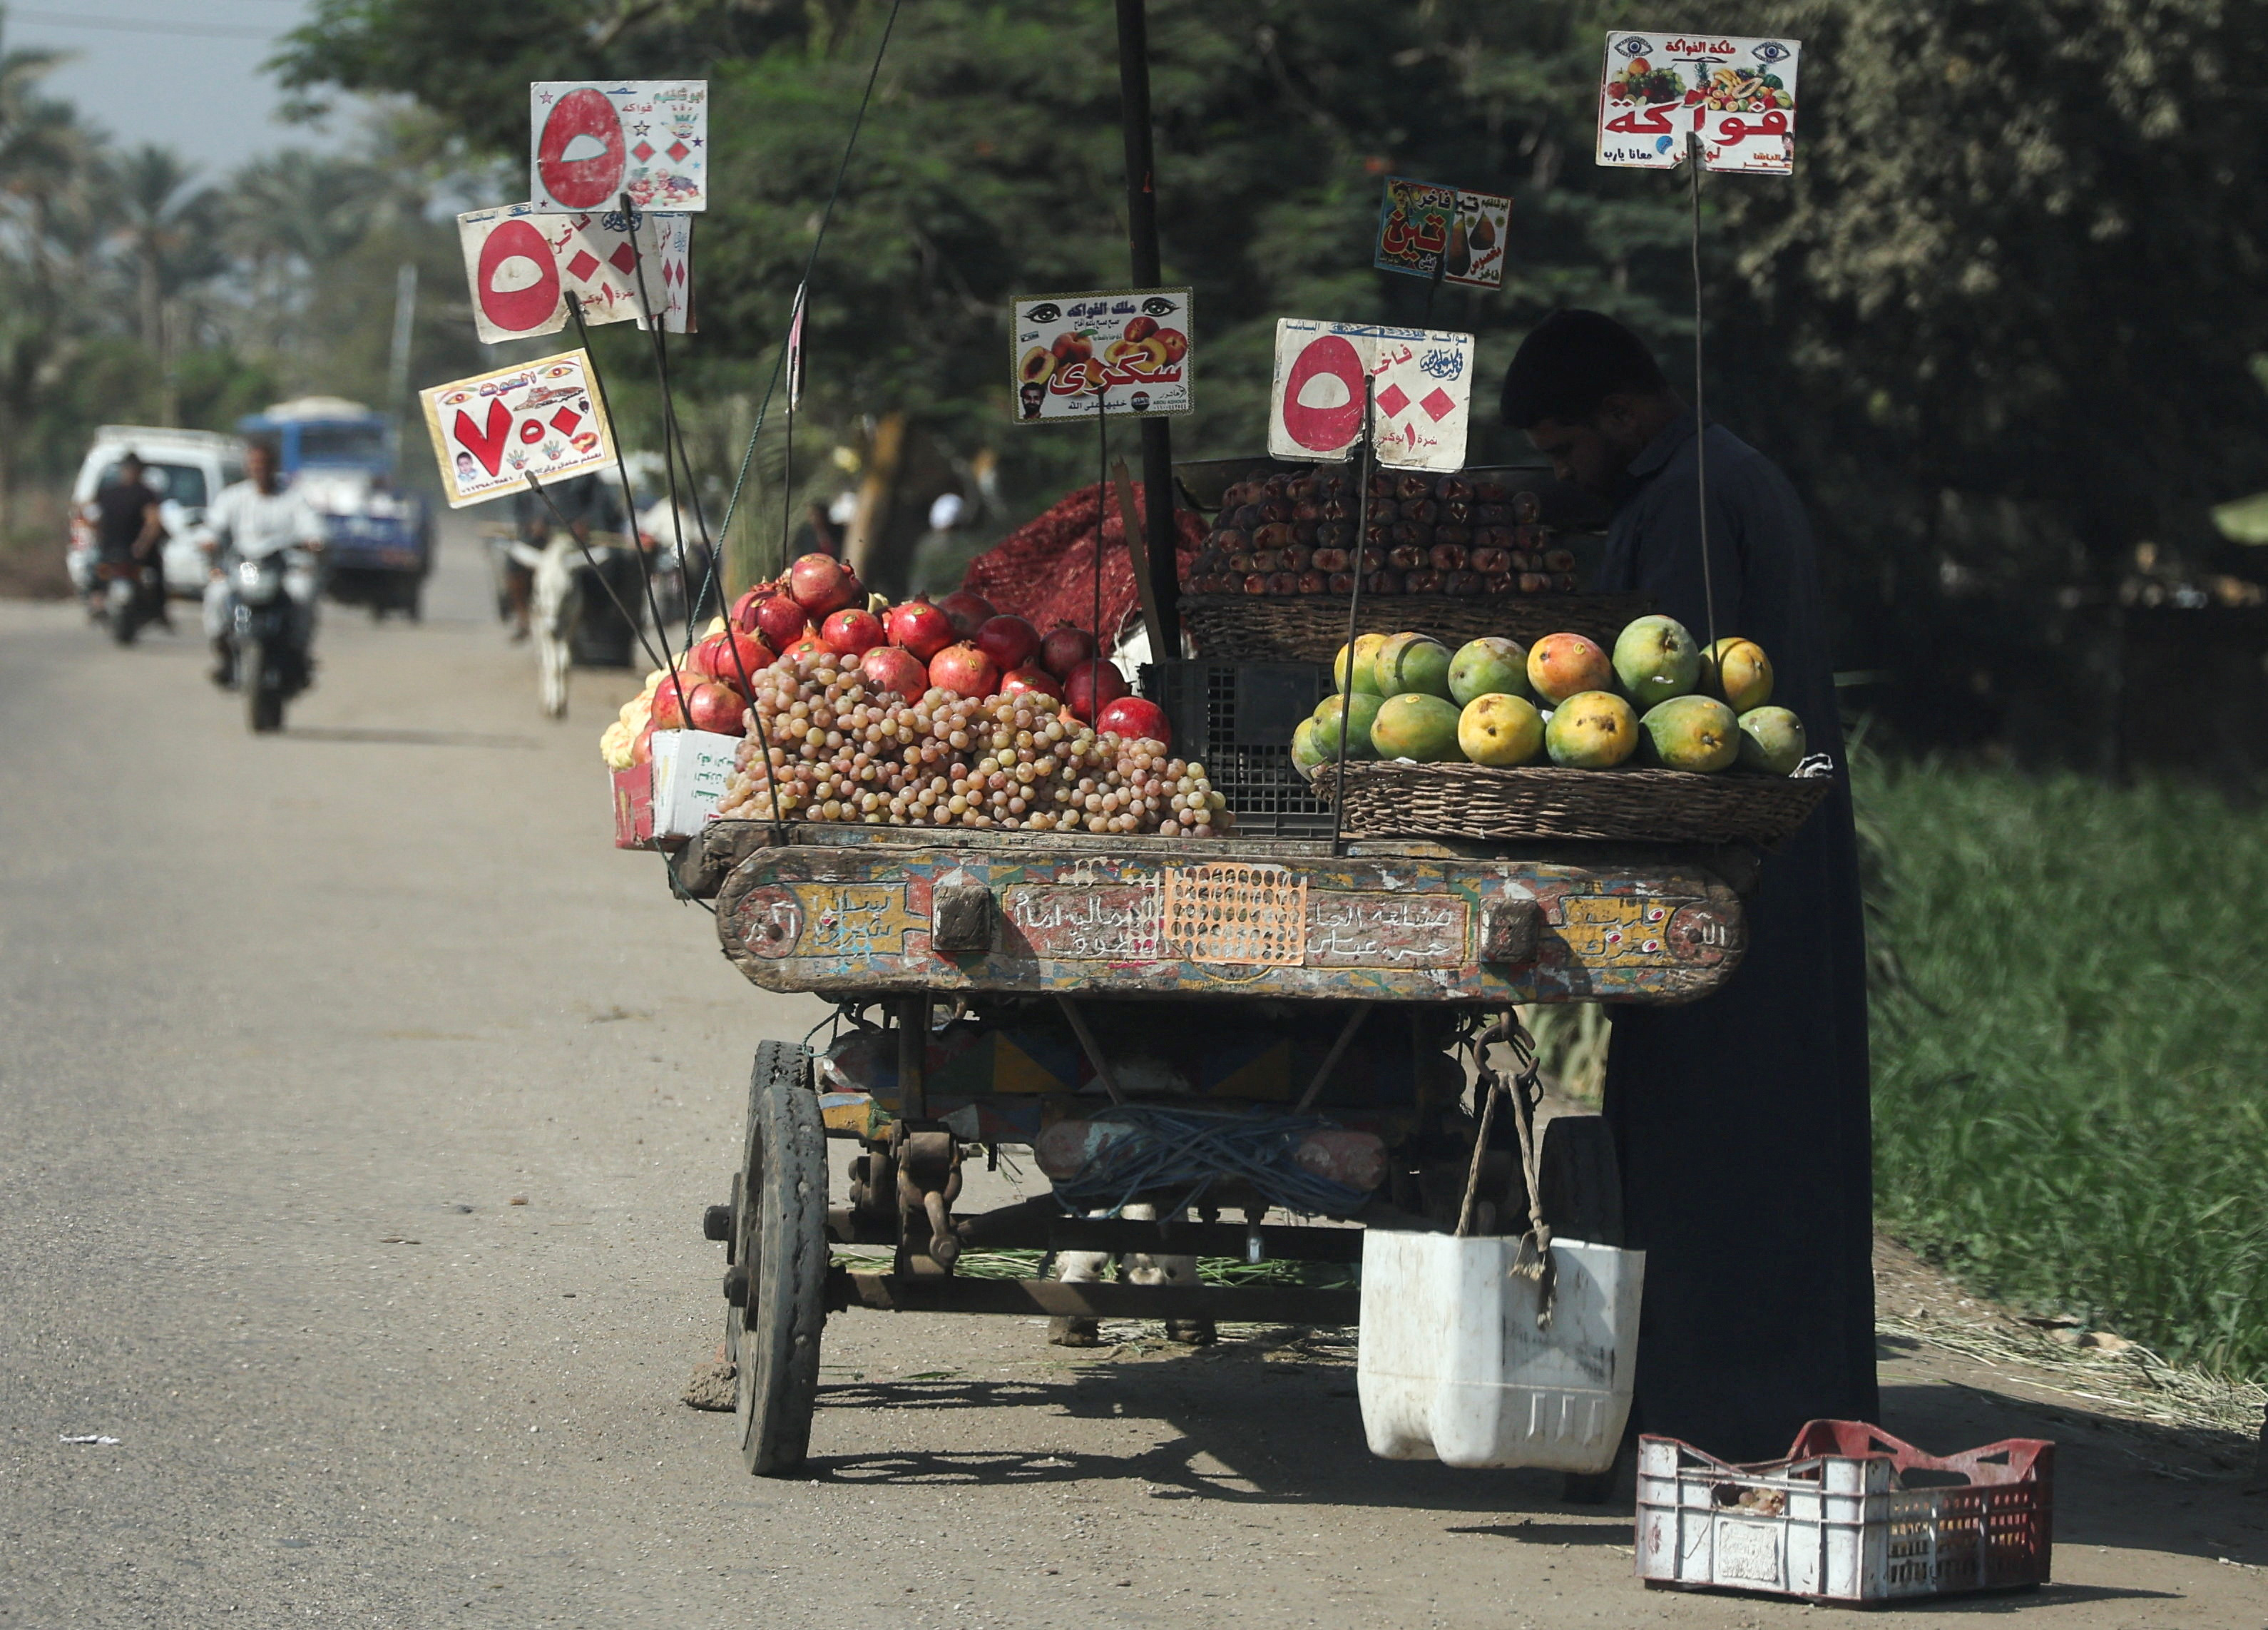 Street vendor stands with vegetables and fruits on a road of village market in Badrshein district on the outskirts of Giza